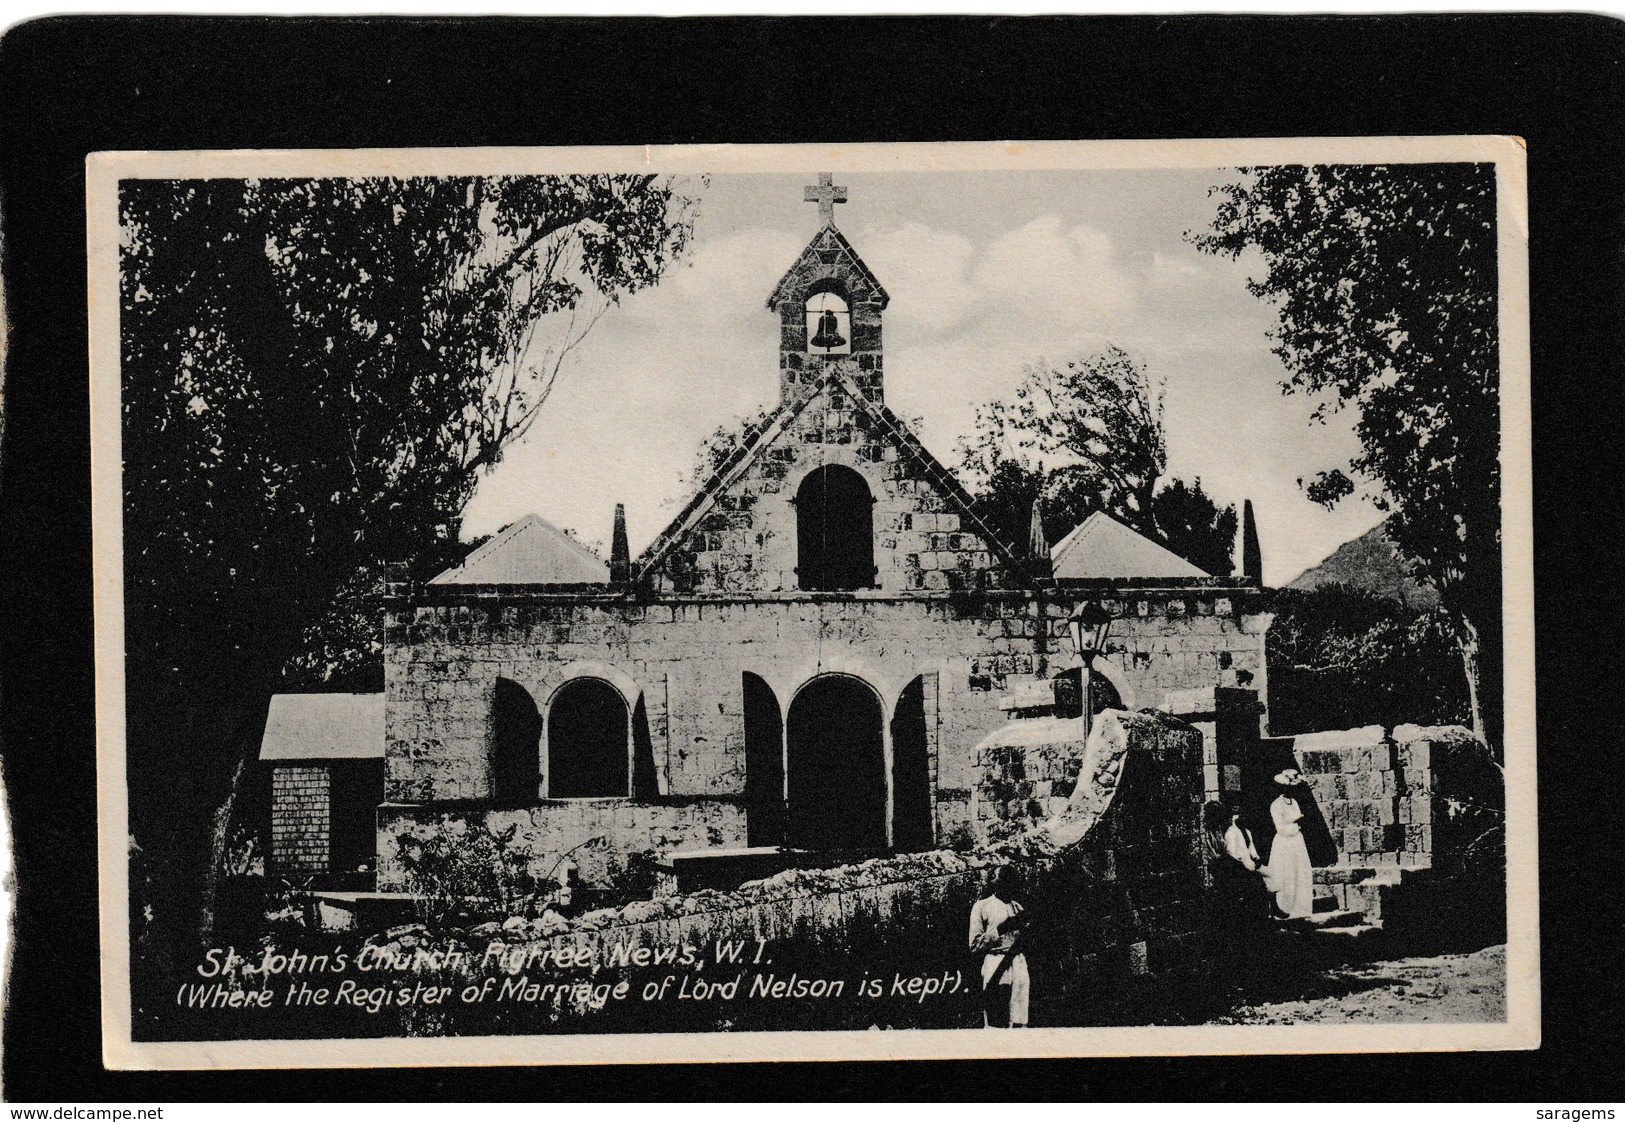 Nevis-Saint John's Church At Figtree 1910s - Antique Postcard - Saint Kitts And Nevis